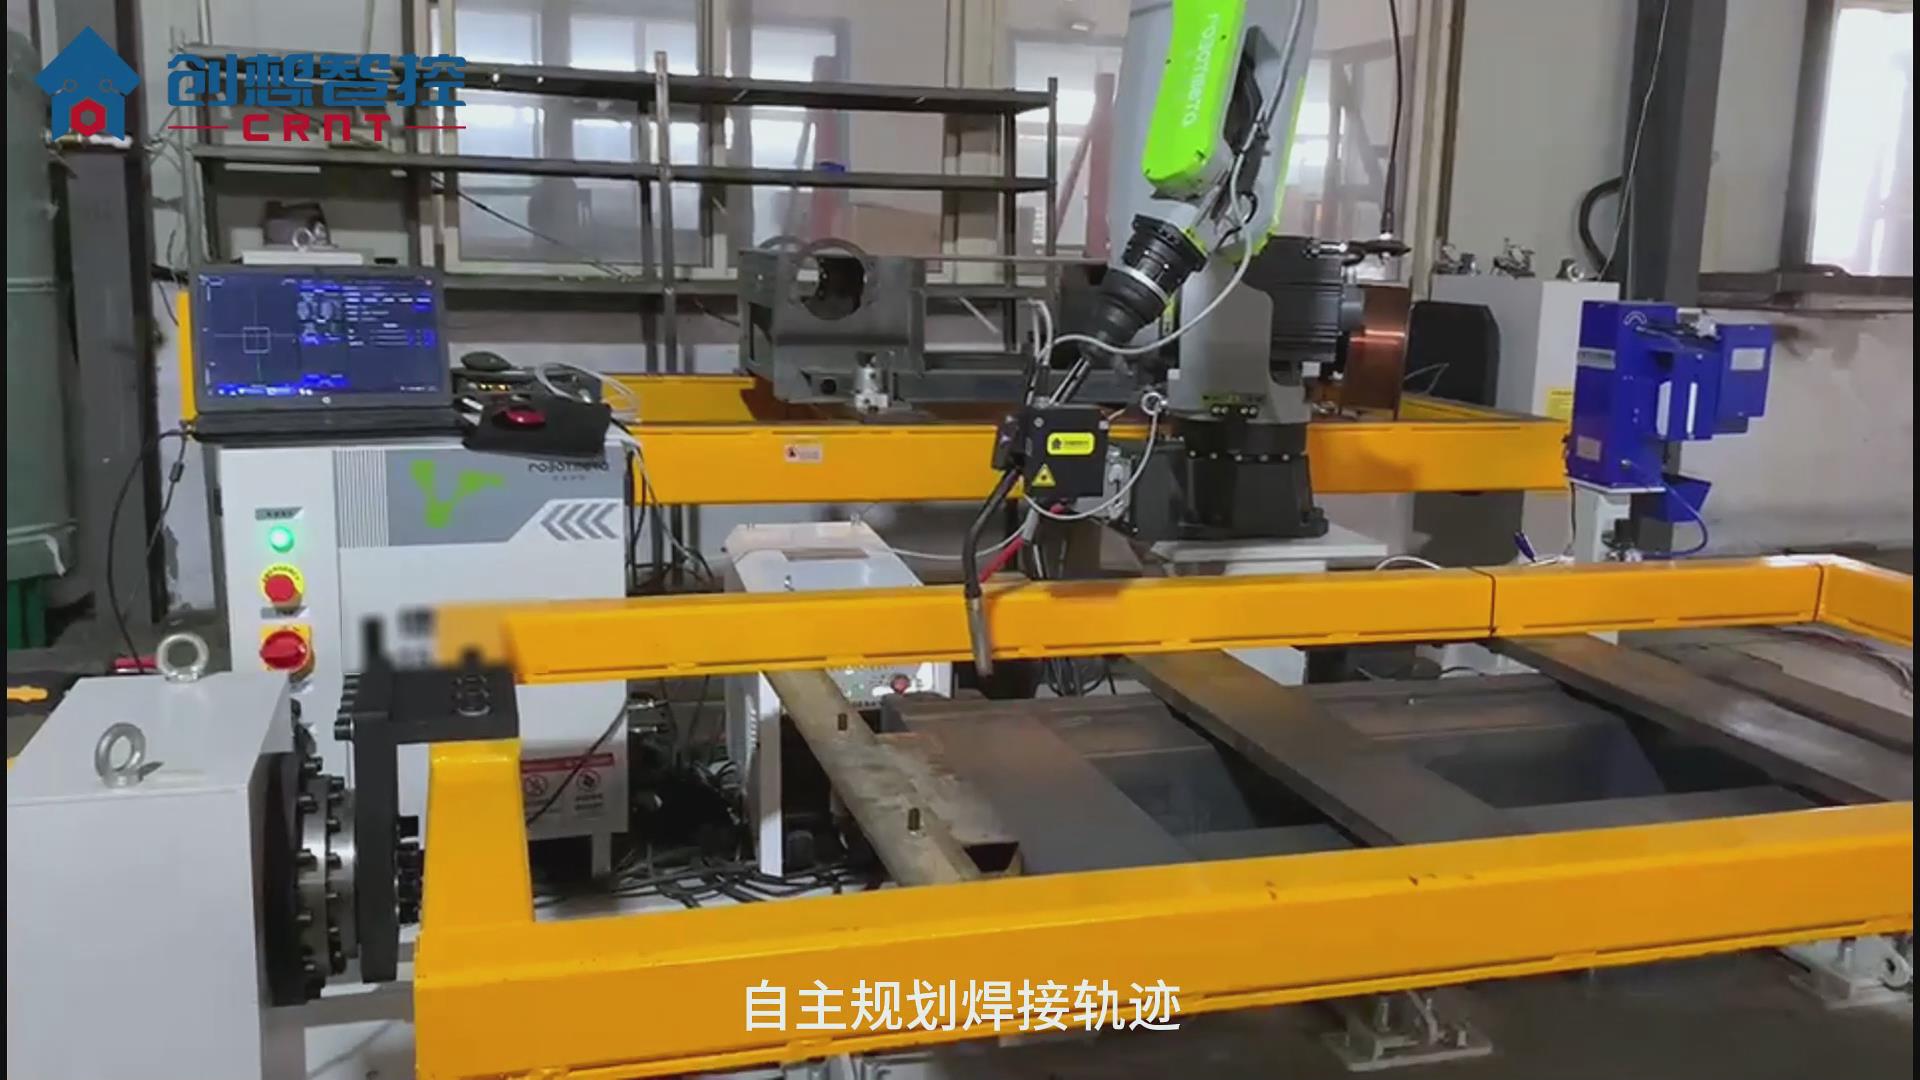 Application Case of ATINY Seam Tracking System with Da Niu Robotics for Intelligent Positioning and Tracking in Automated Welding